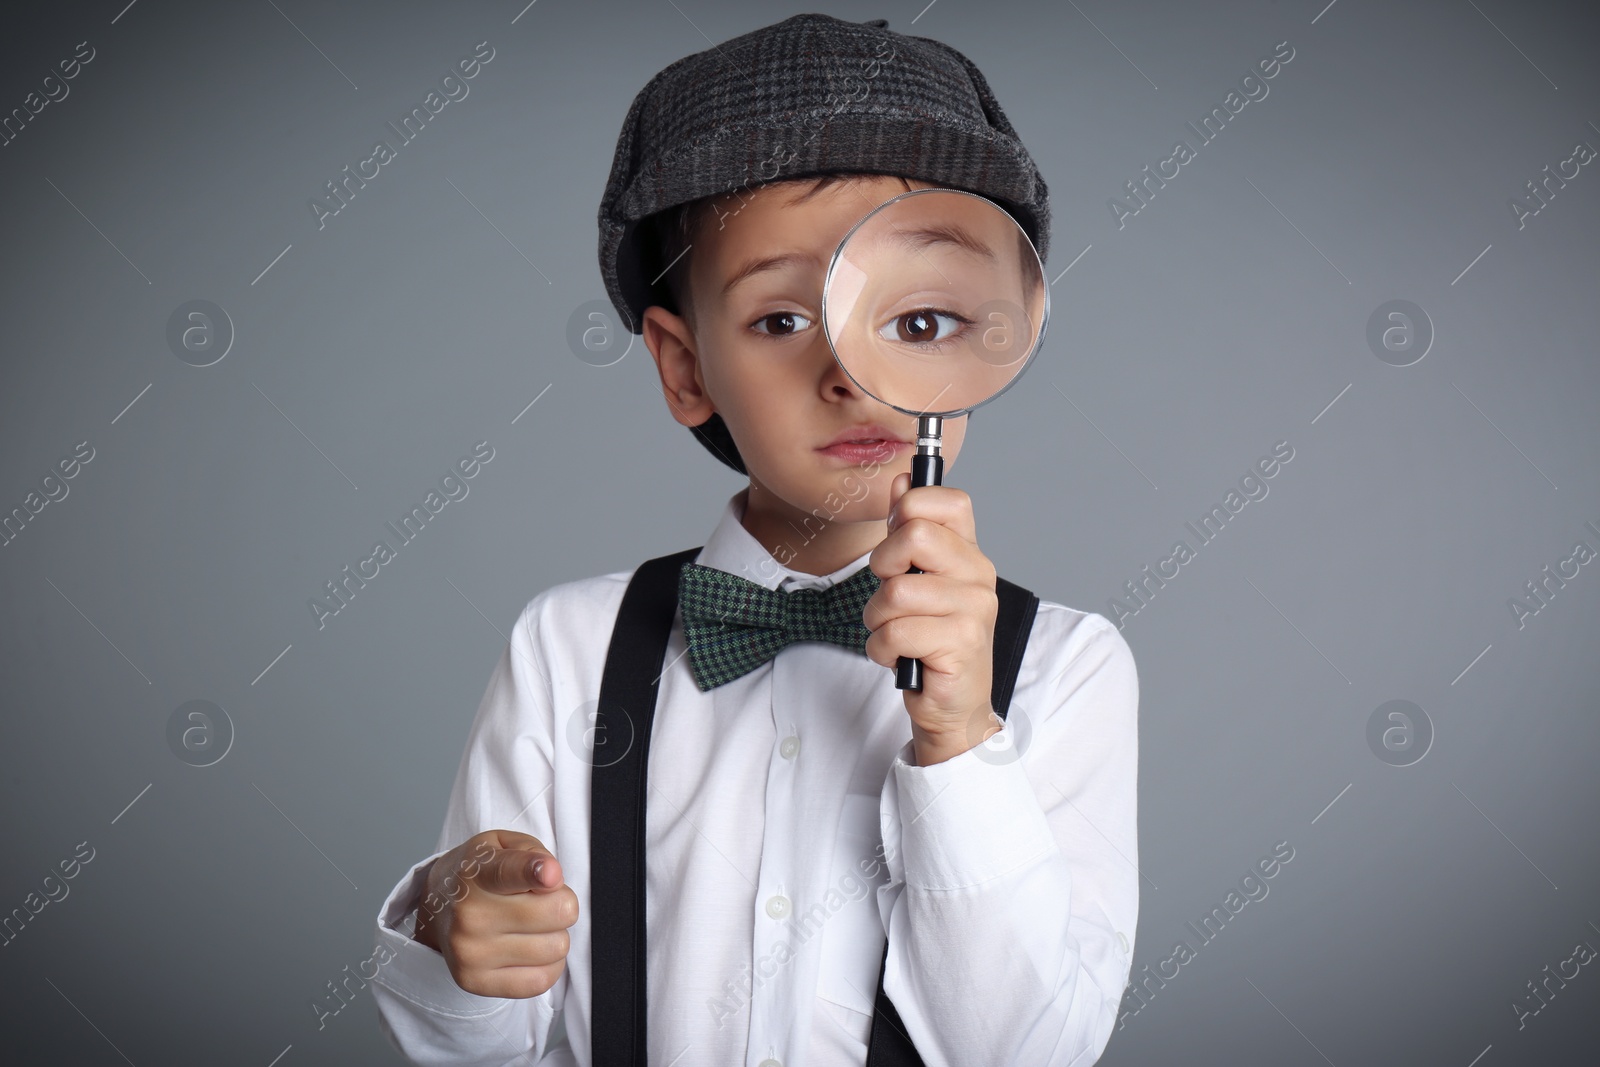 Photo of Little boy with magnifying glass playing detective on grey background